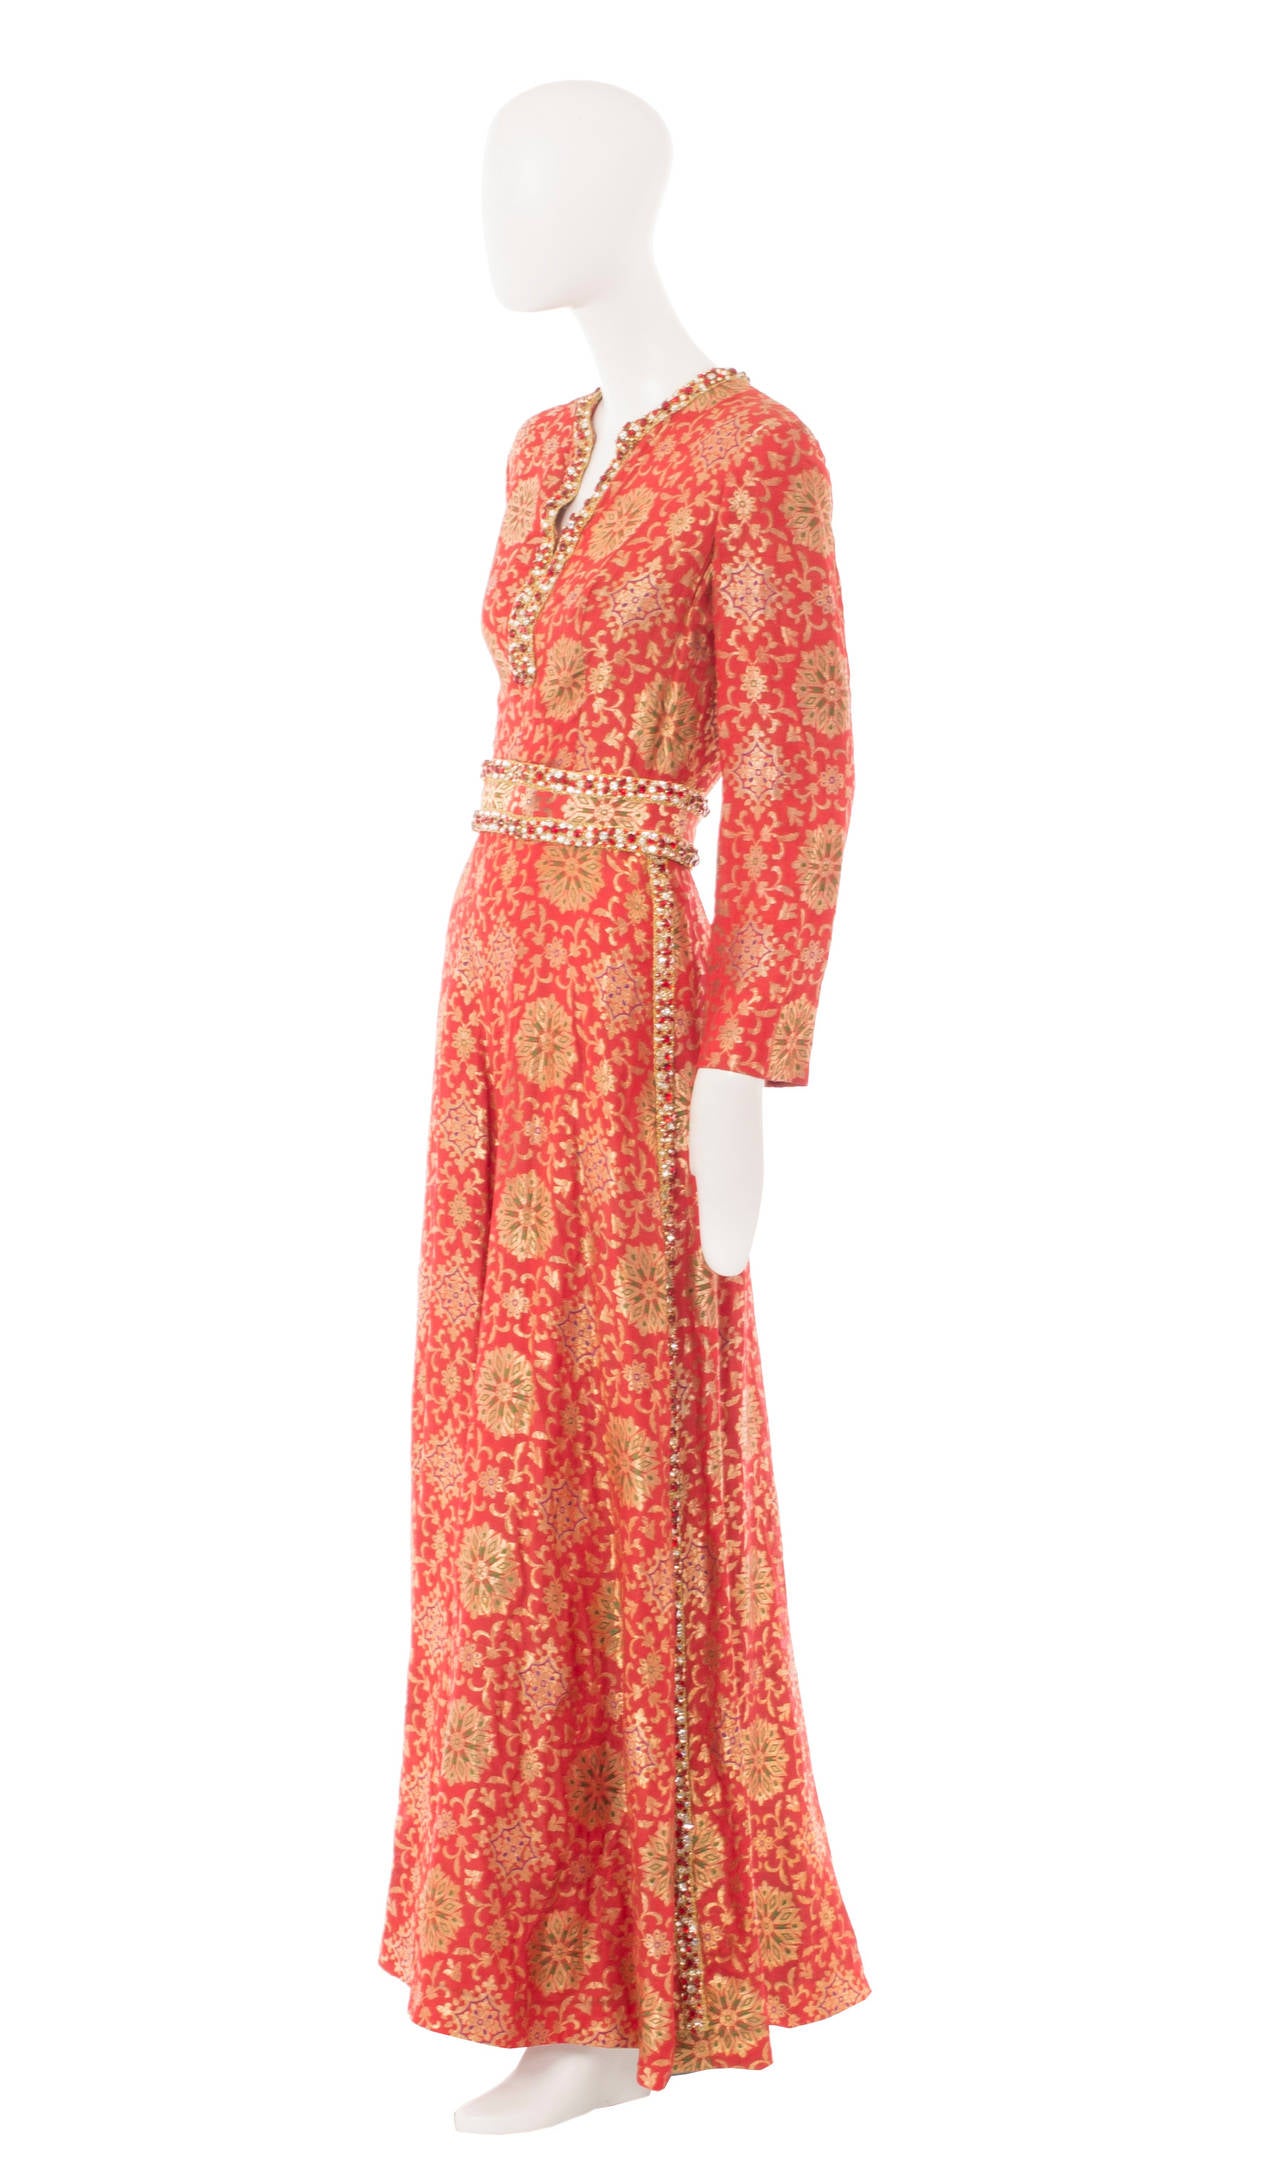 A fabulous alternative to a dress for a special event, this Adele Simpson jumpsuit, constructed in red silk featuring a gold brocade pattern, is ultra glamorous!  The jumpsuit features long sleeves, wide legs and hidden inside pockets on the hip.